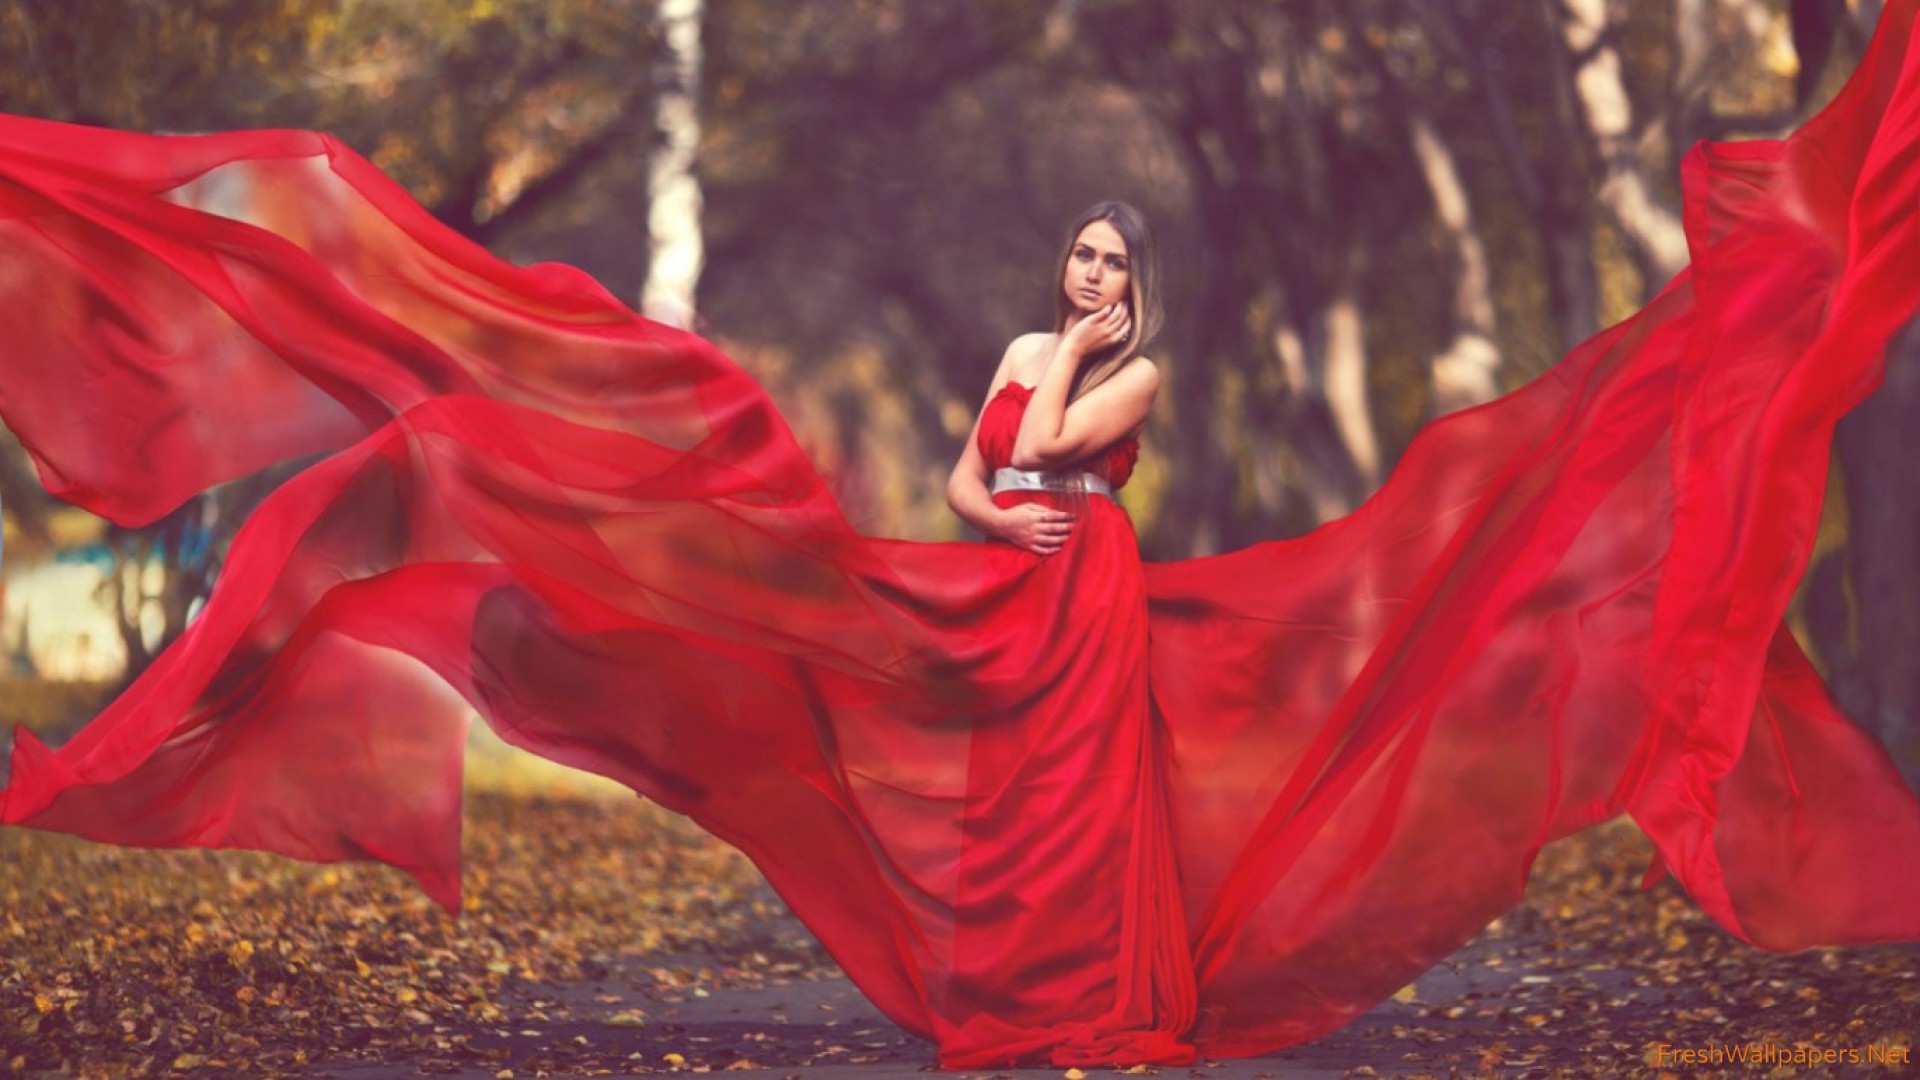 Girl In Red Dress Photography - HD Wallpaper 